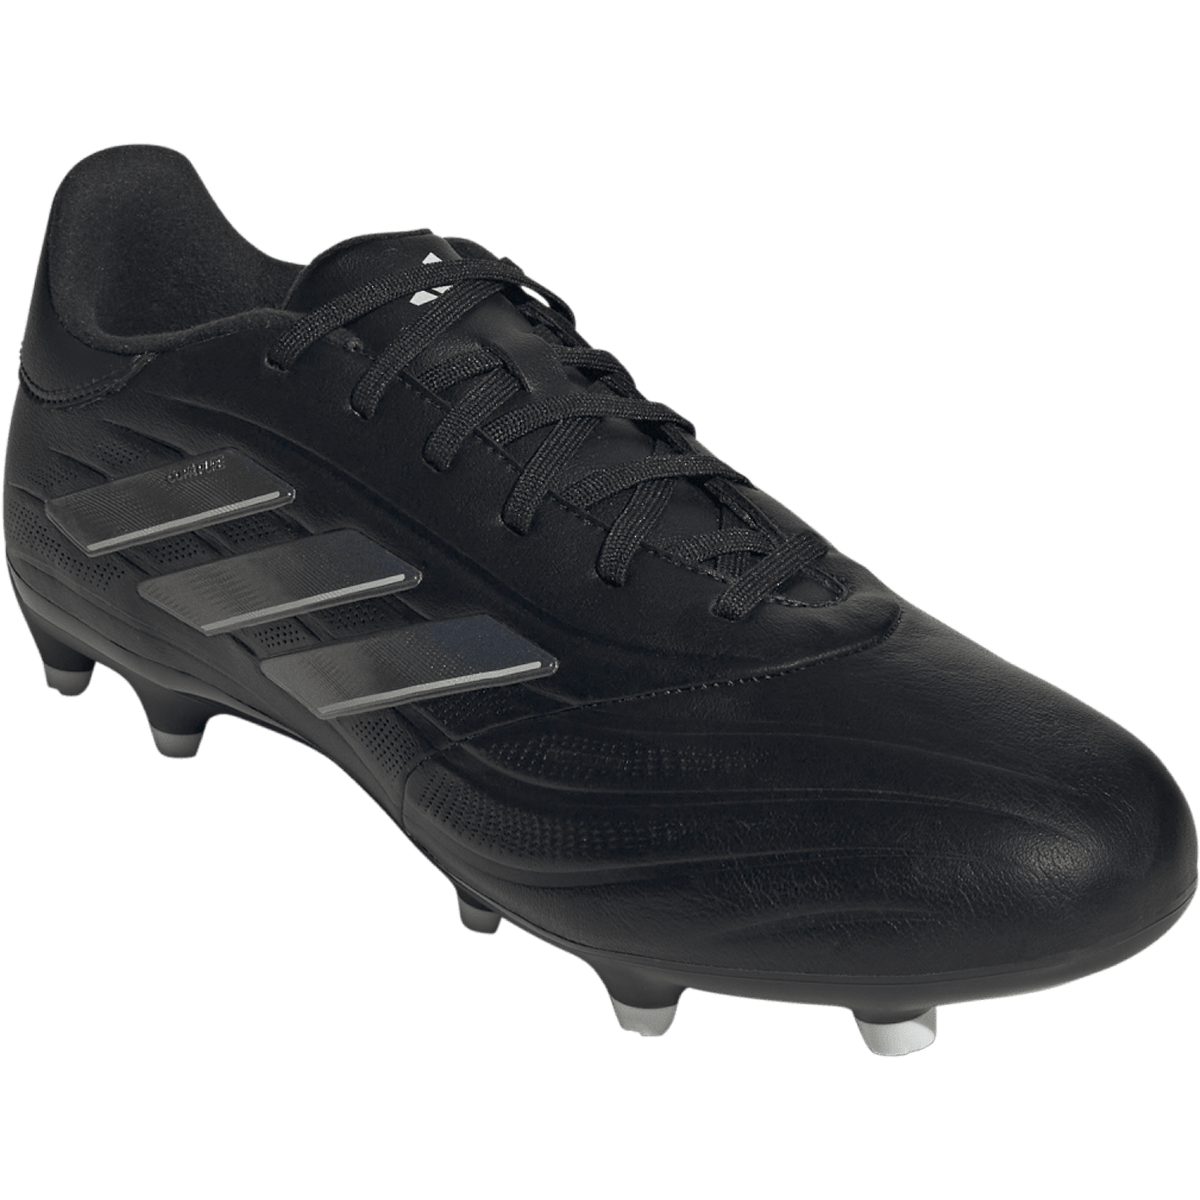 Copa Pure 2 League Firm Ground alternate view